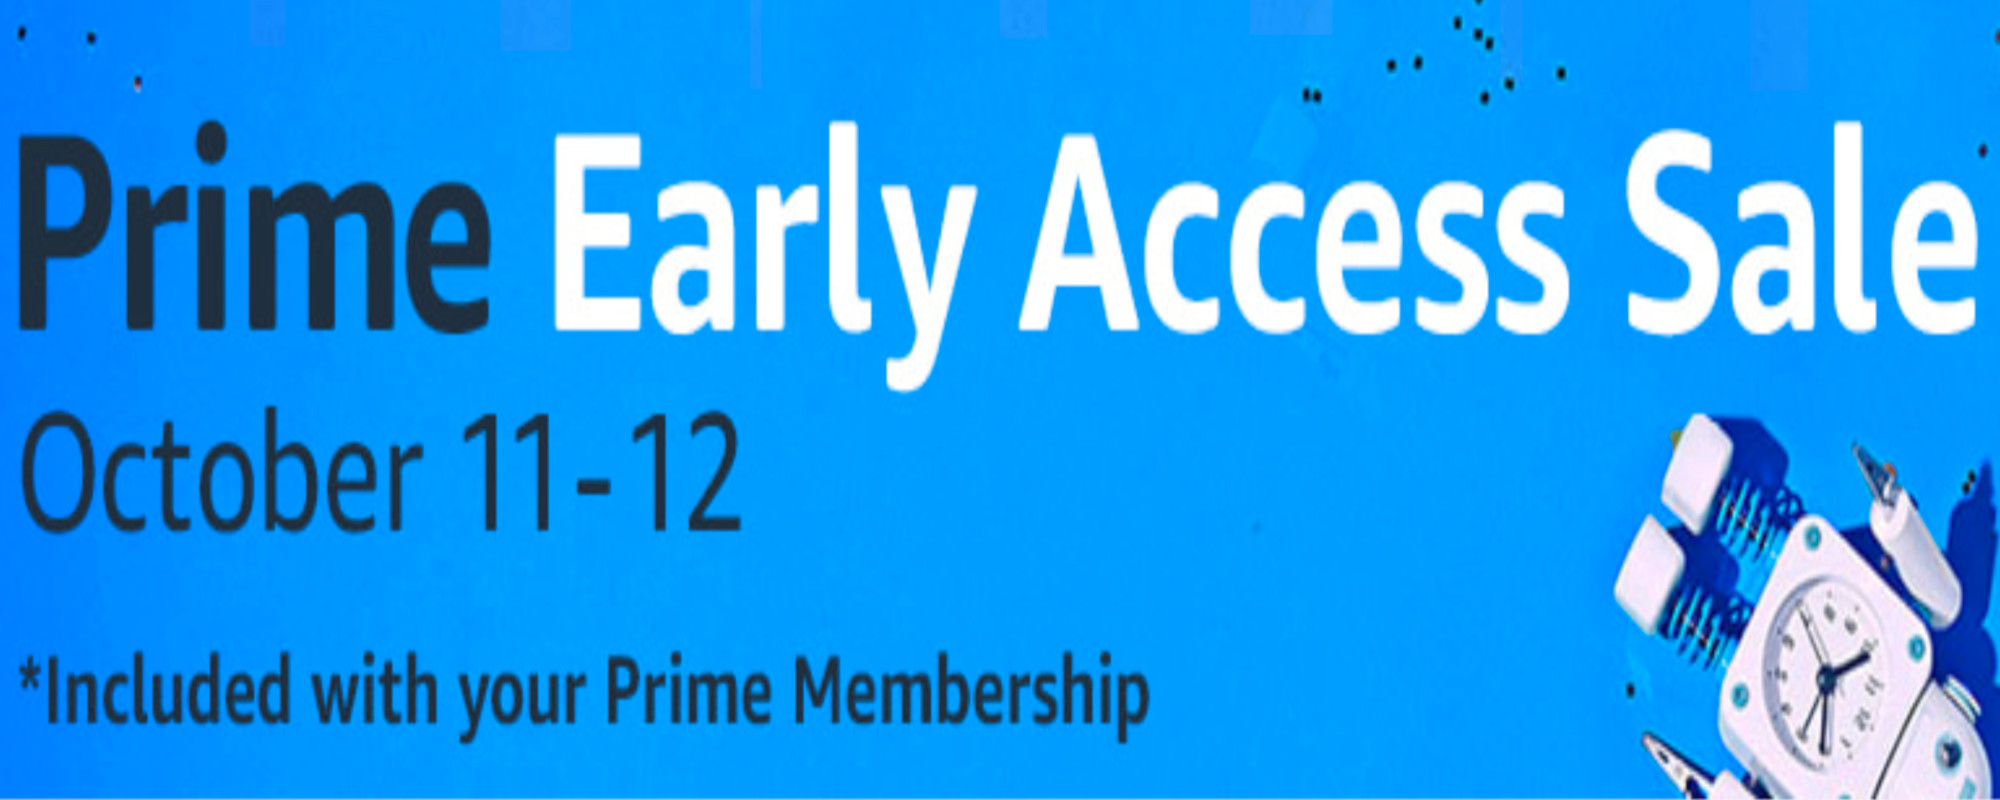 The best deals of the  Prime Early Access Sale